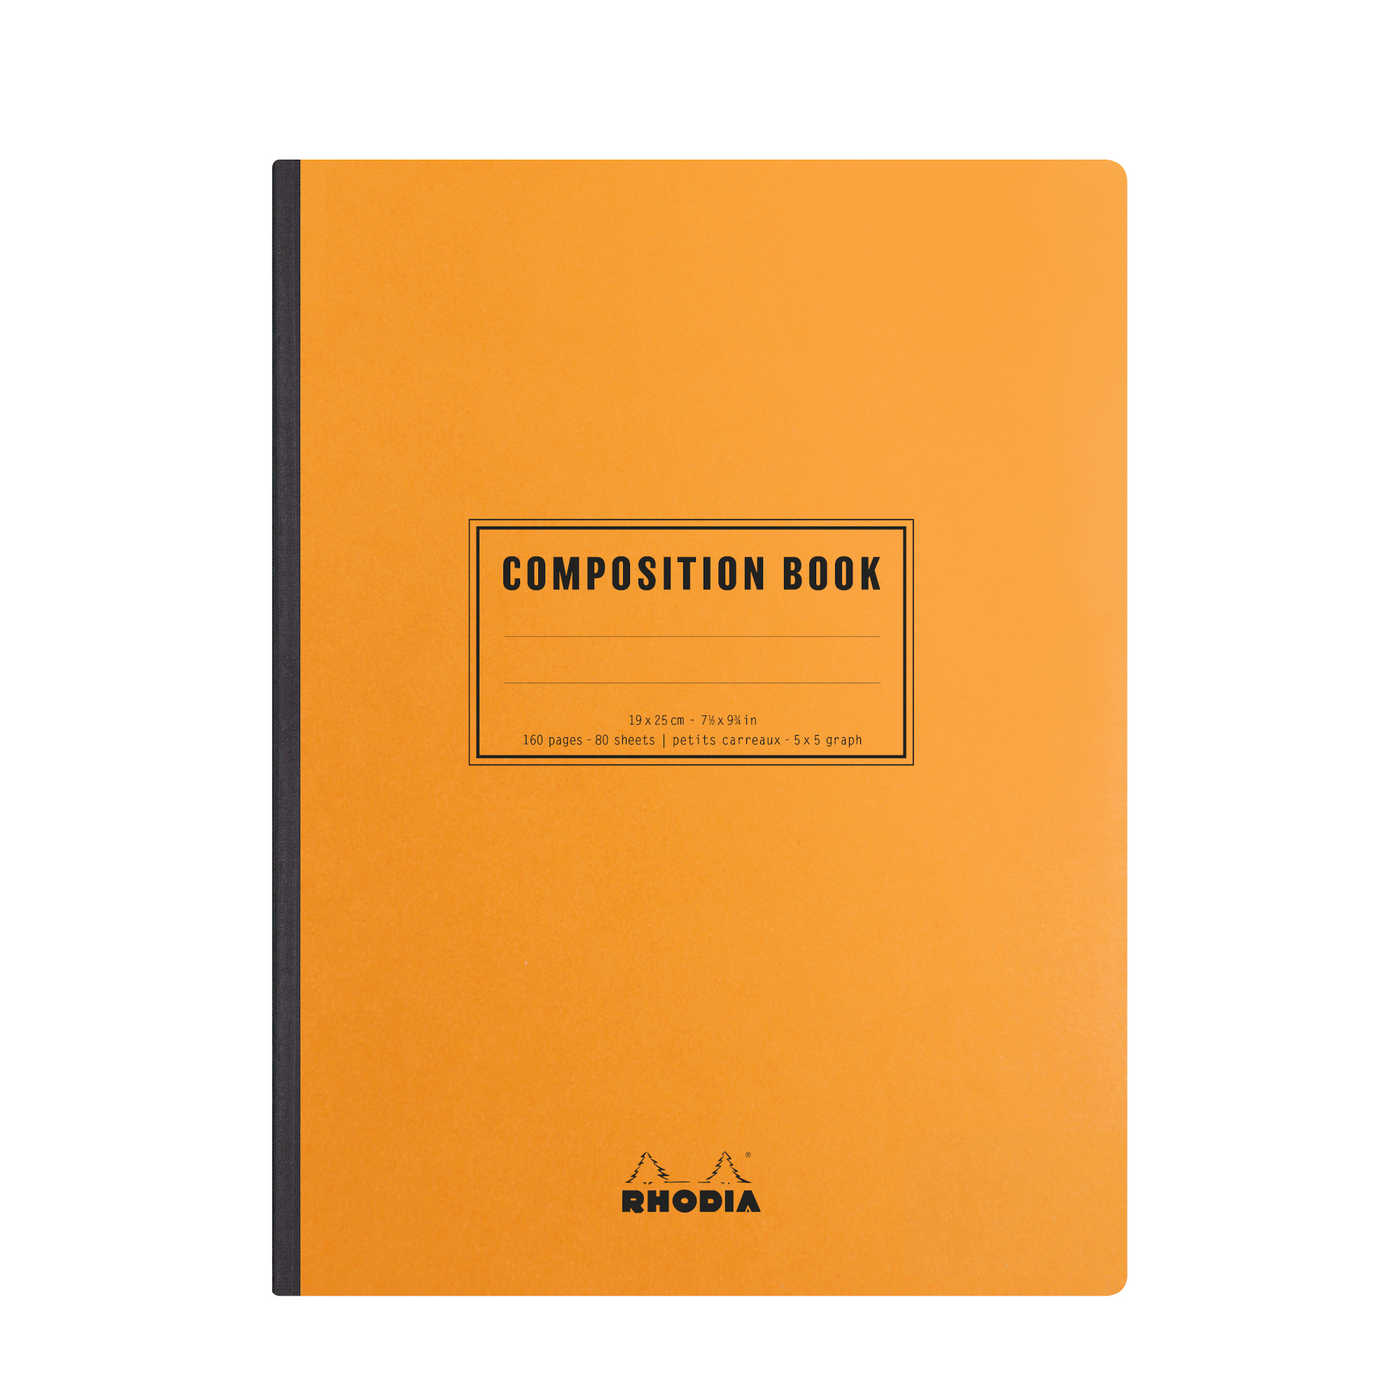 Rhodia Composition Book - Lined 160 sheets - 7 1/2 x 9 3/4 - Orange Cover | Atlas Stationers.